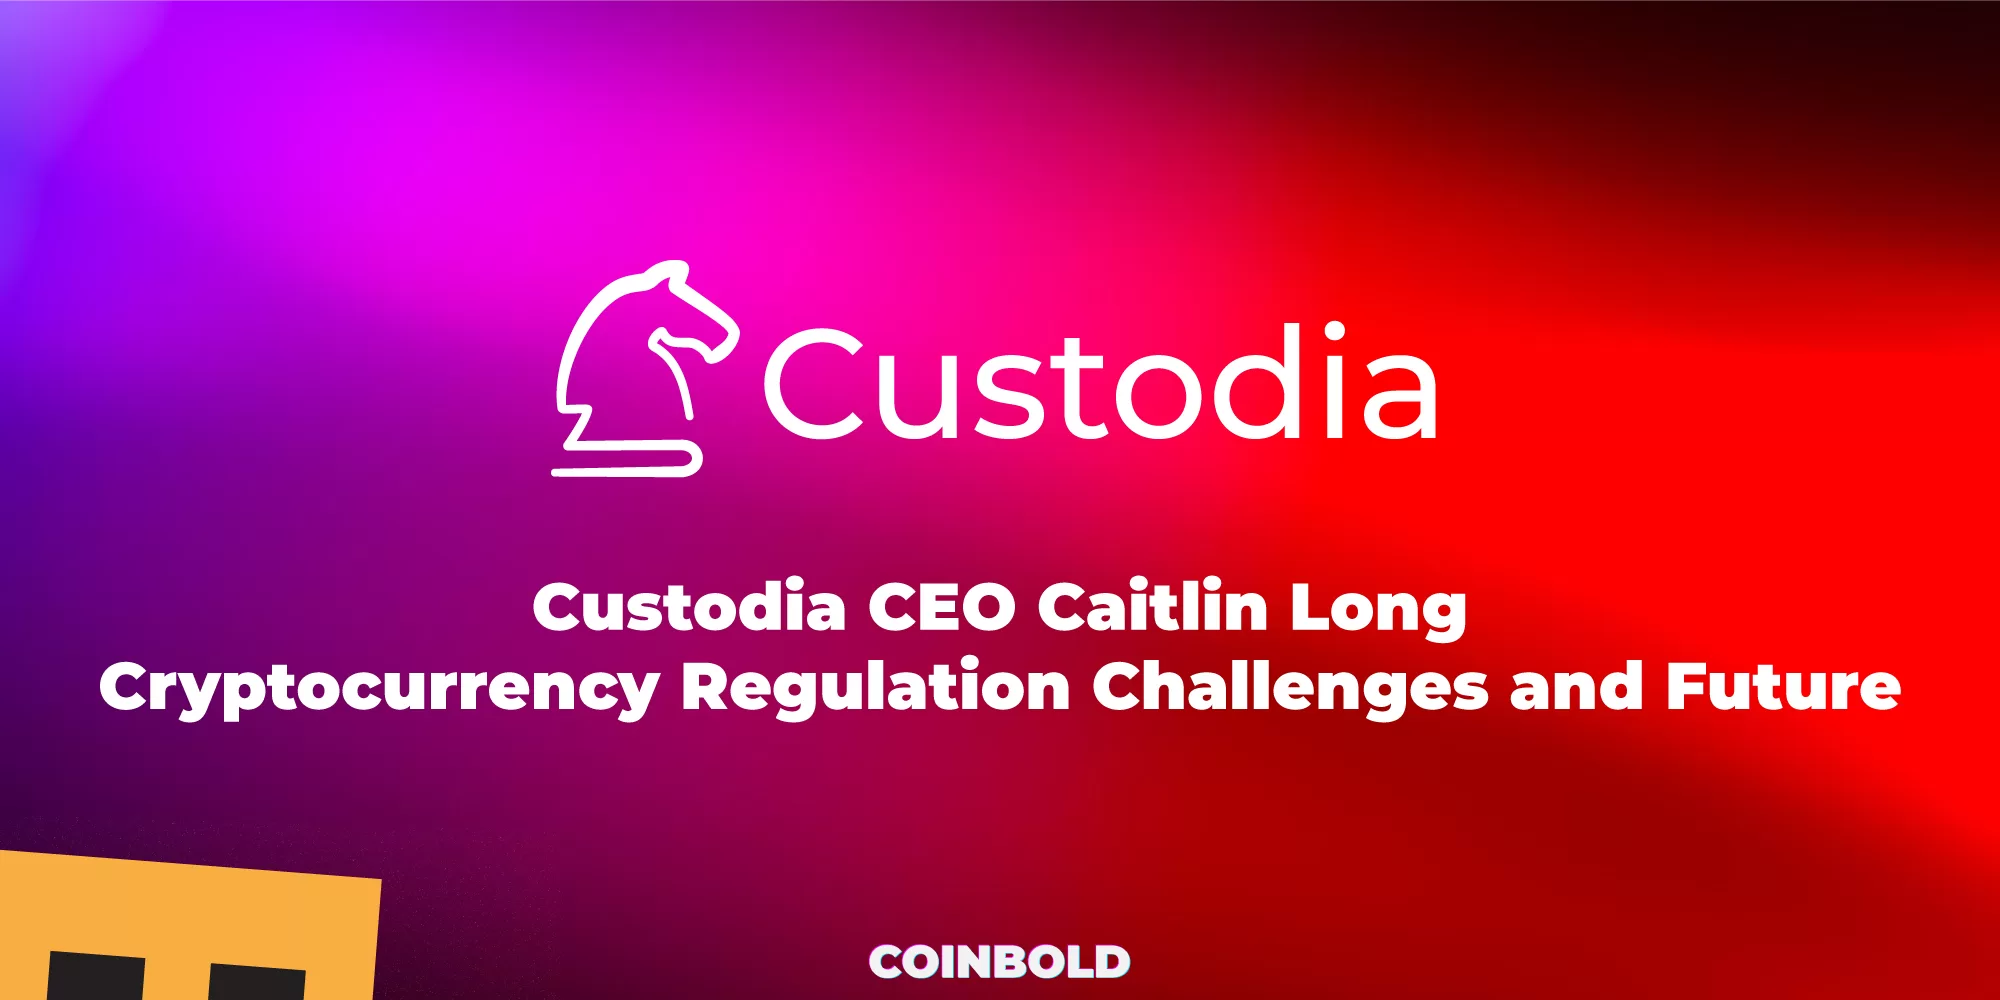 Custodia CEO Caitlin Long Cryptocurrency Regulation Challenges and Future Plans